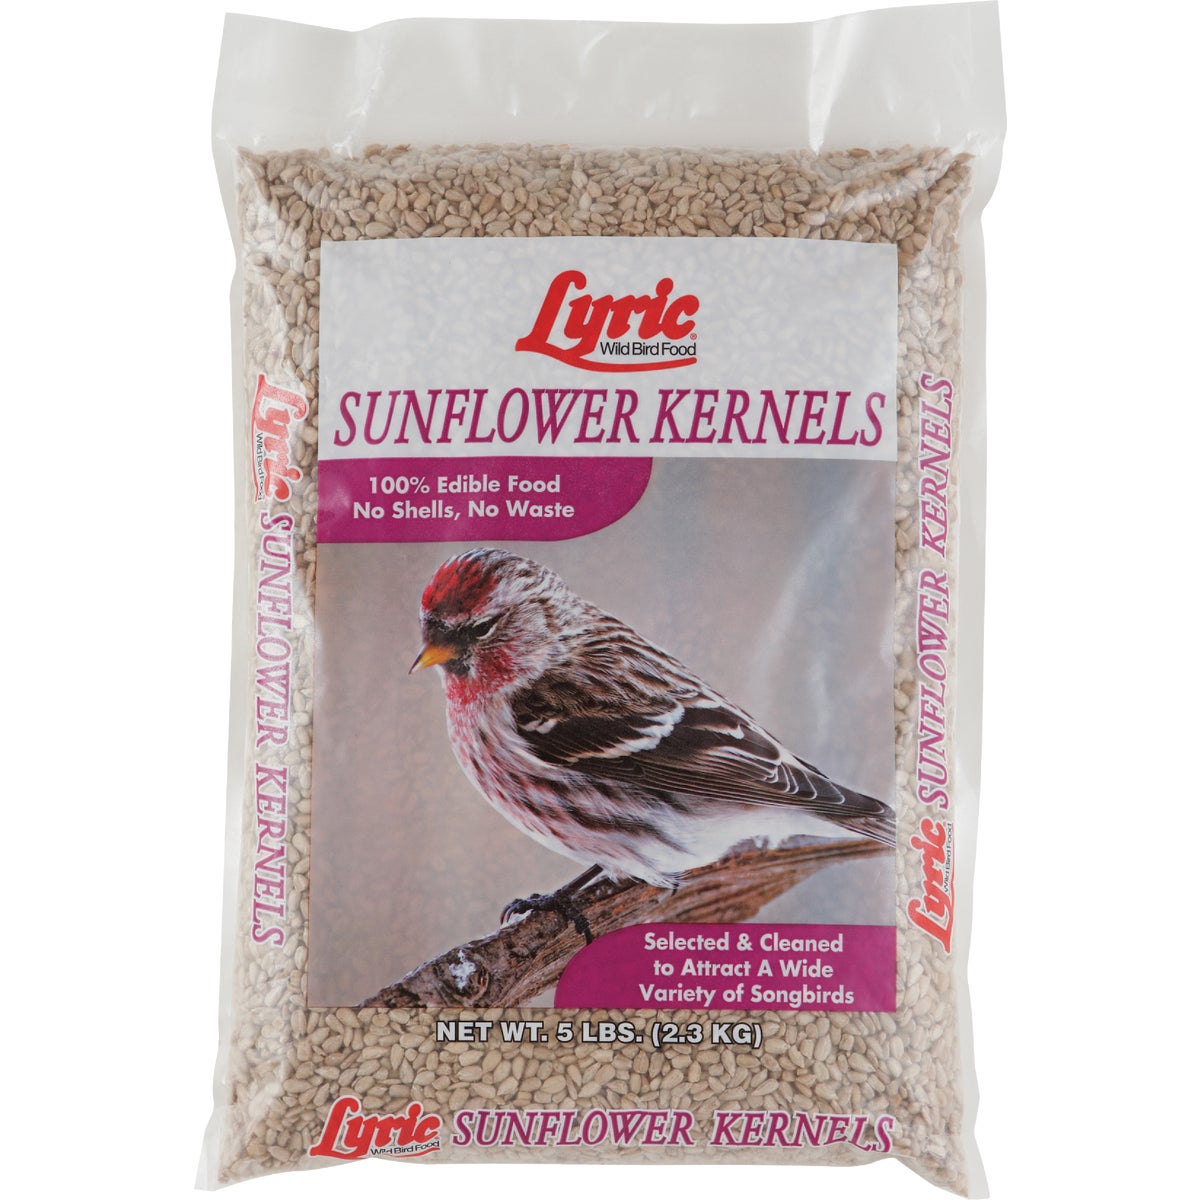 Item 701865, Sunflower kernels are a good source of fat and protein for buntings, 